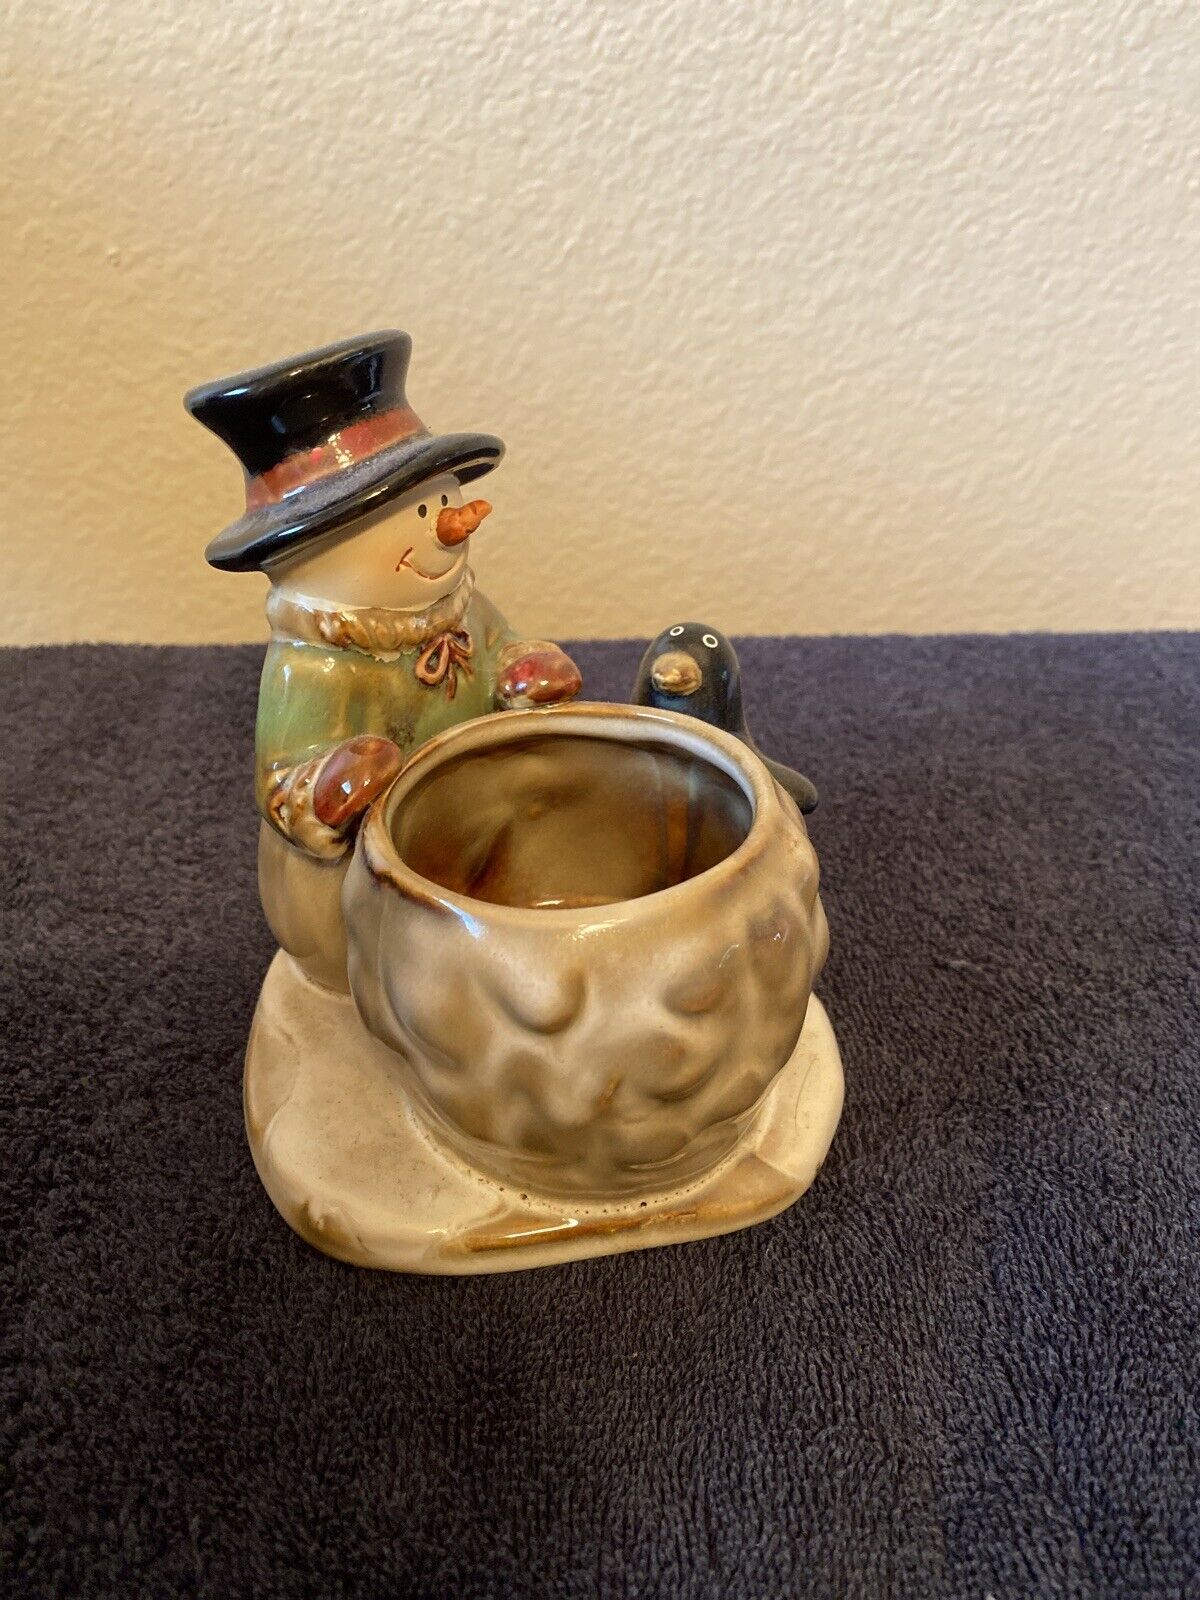 Yankee Candle - Snowman and Holder Design Genuine Free Shipping Penguin NEW Kansas City Mall